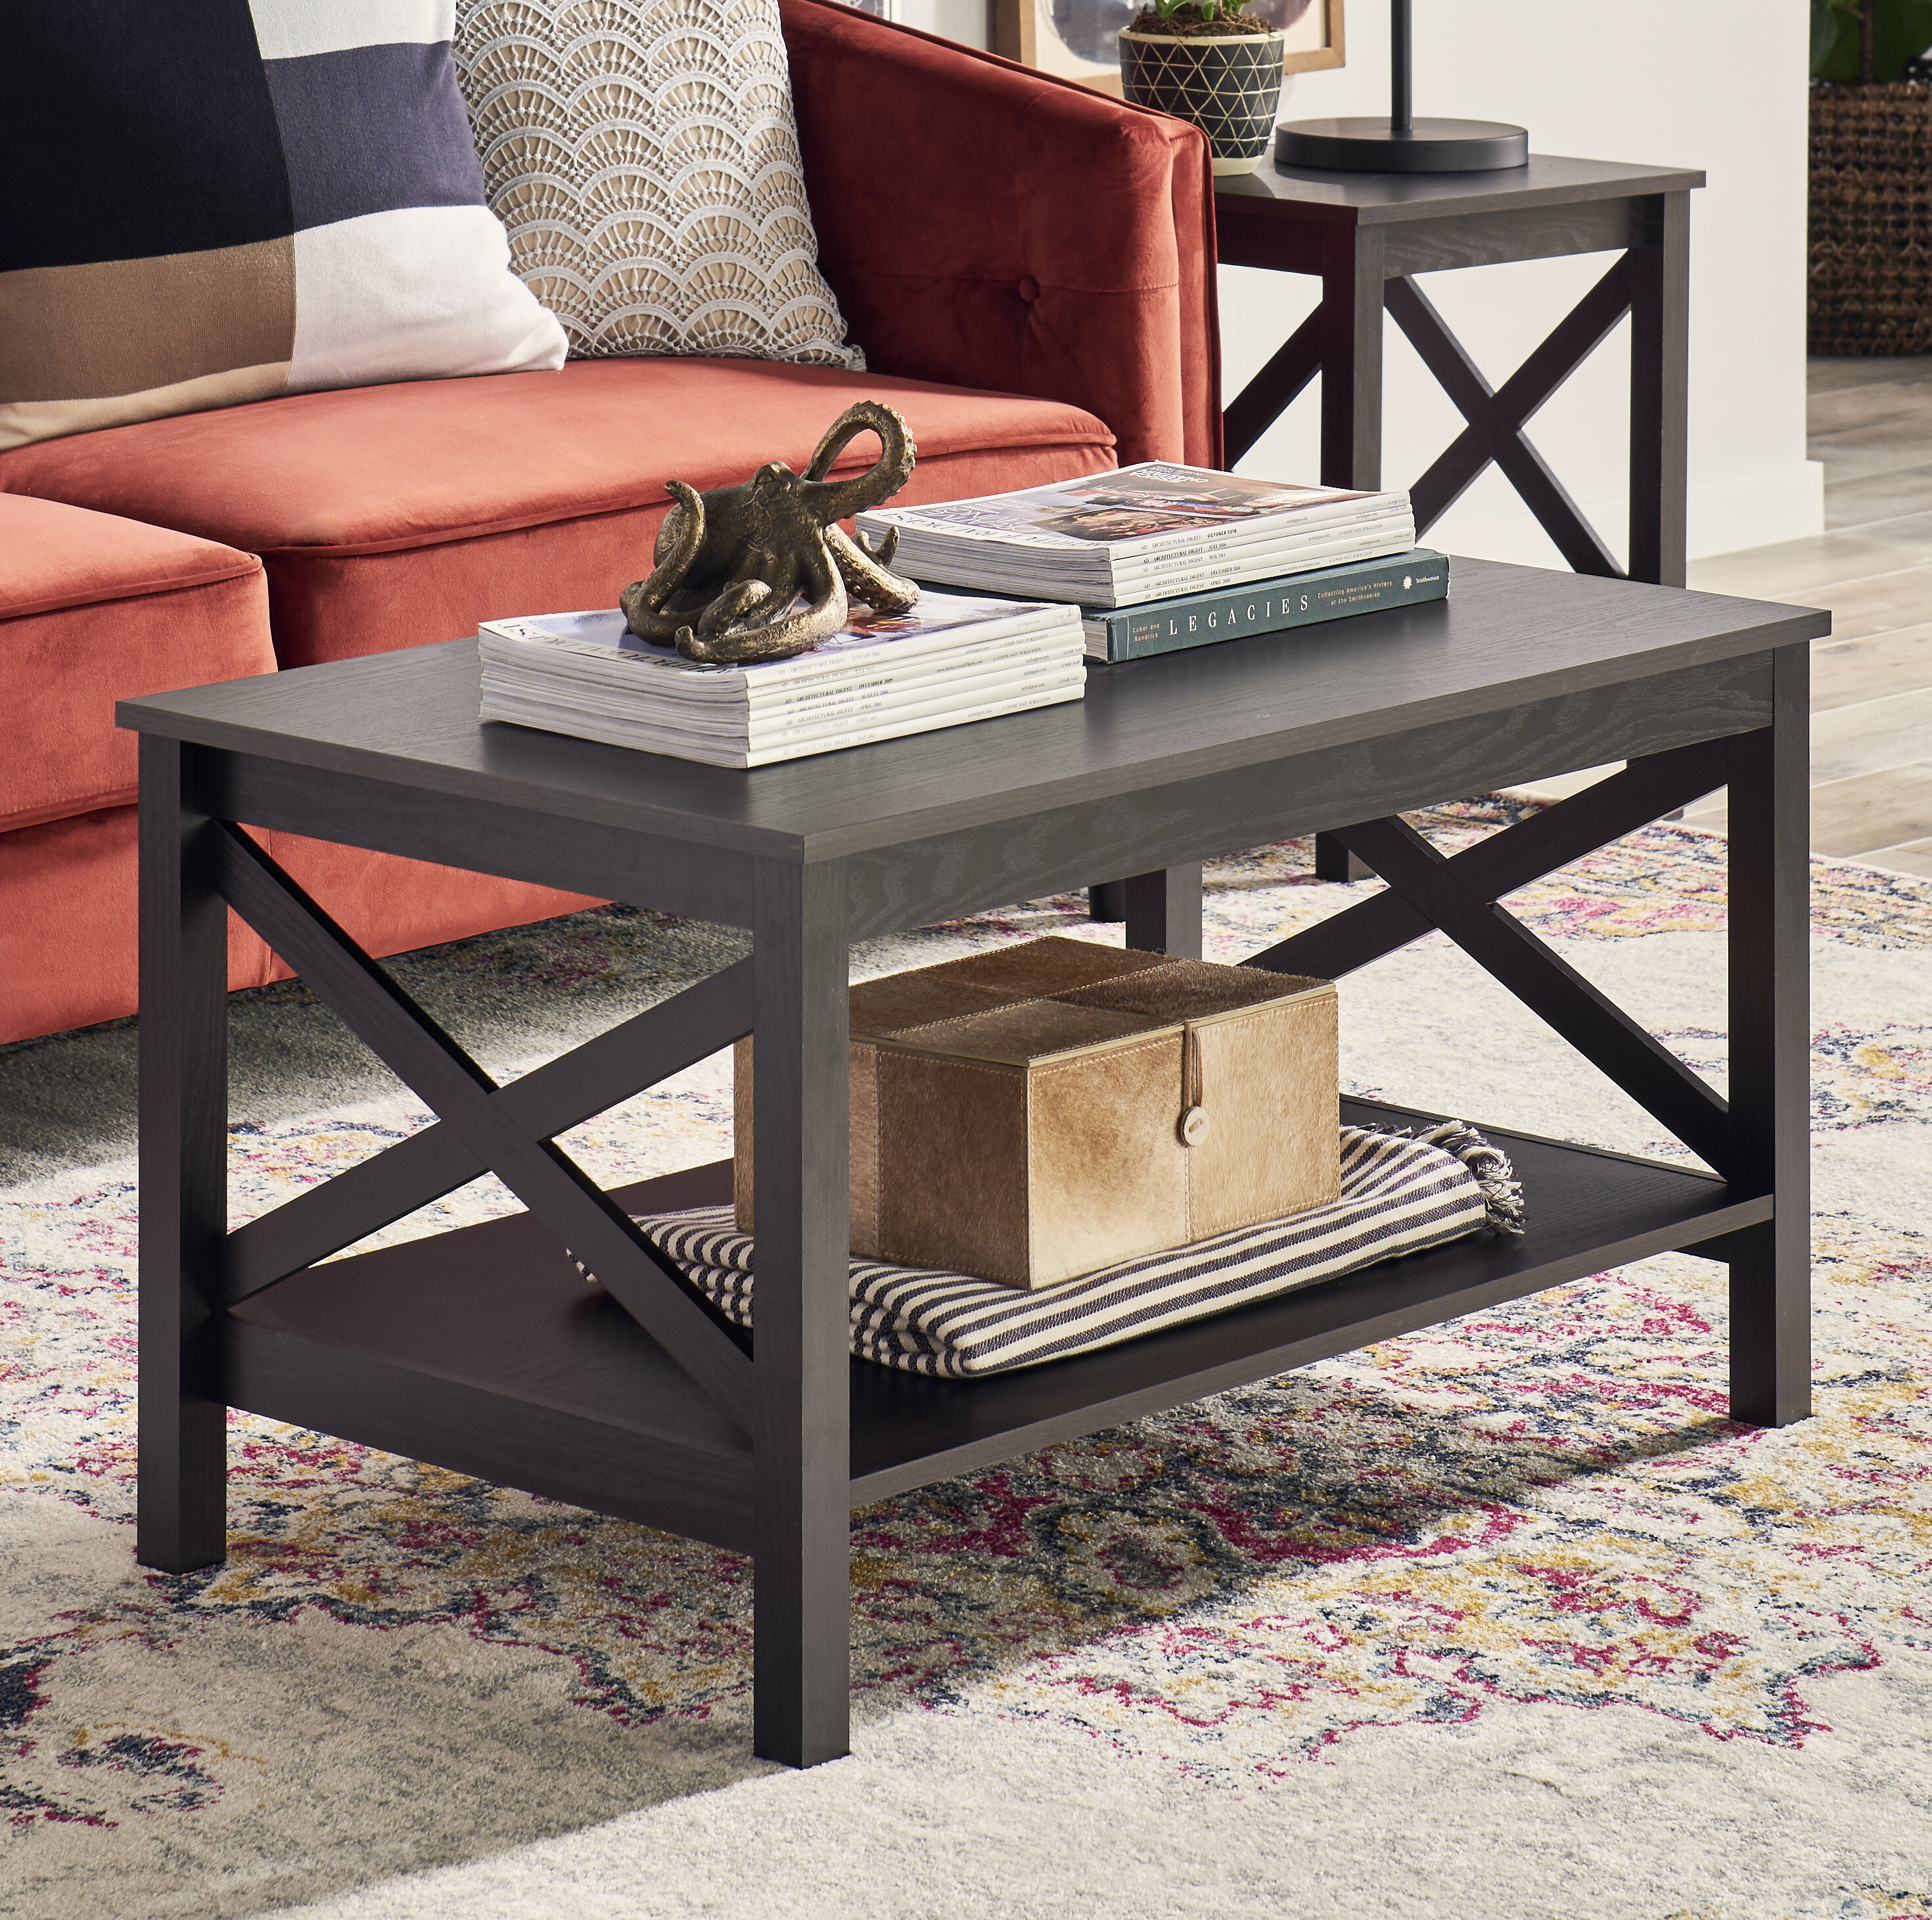 Closetmaid X Frame Two Tier Coffee Table With Tray Top Wayfair within dimensions 2940 X 2922